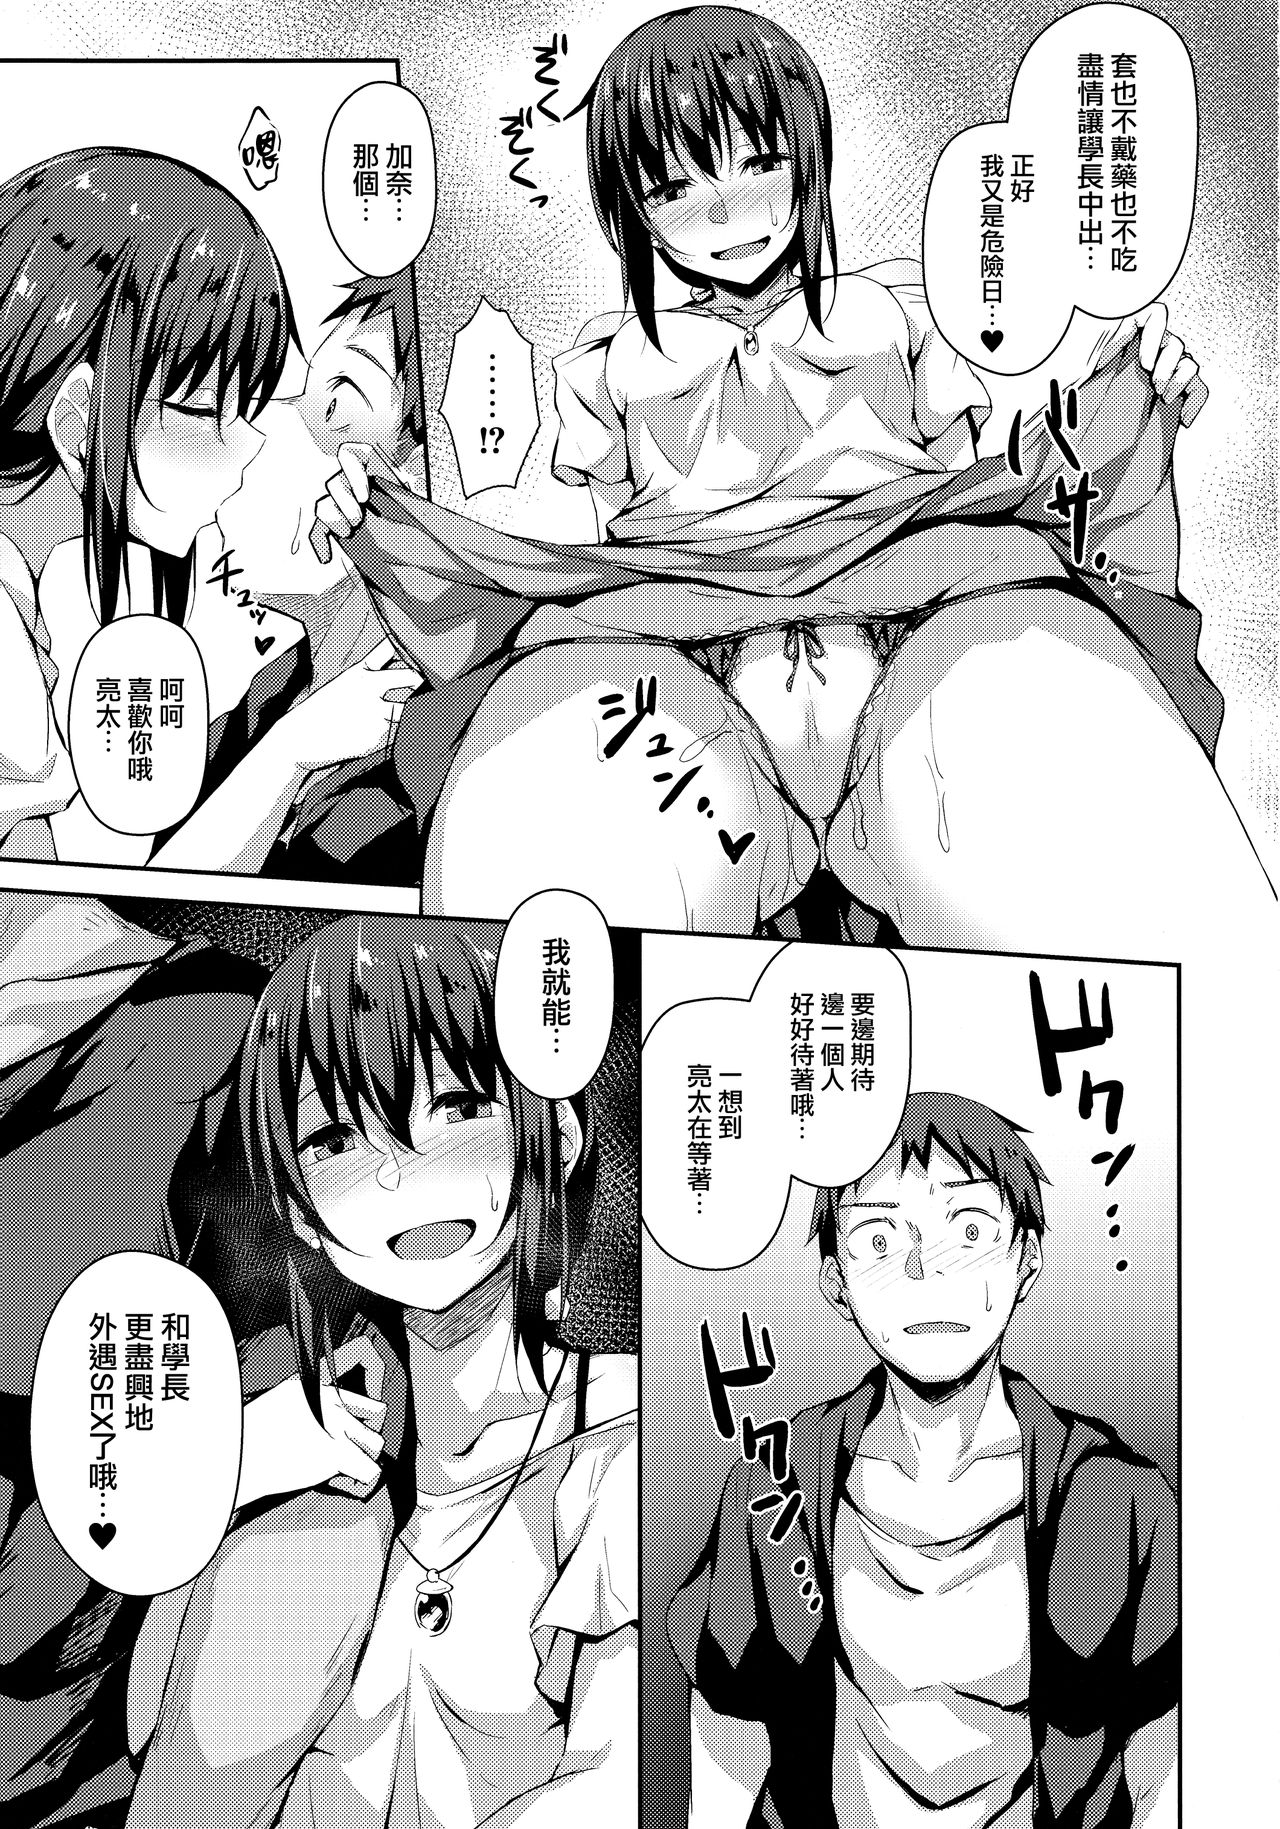 (C96) [Hiiro no Kenkyuushitsu (Hitoi)] NeuTRal Actor3 [Chinese] [無毒漢化組] page 31 full